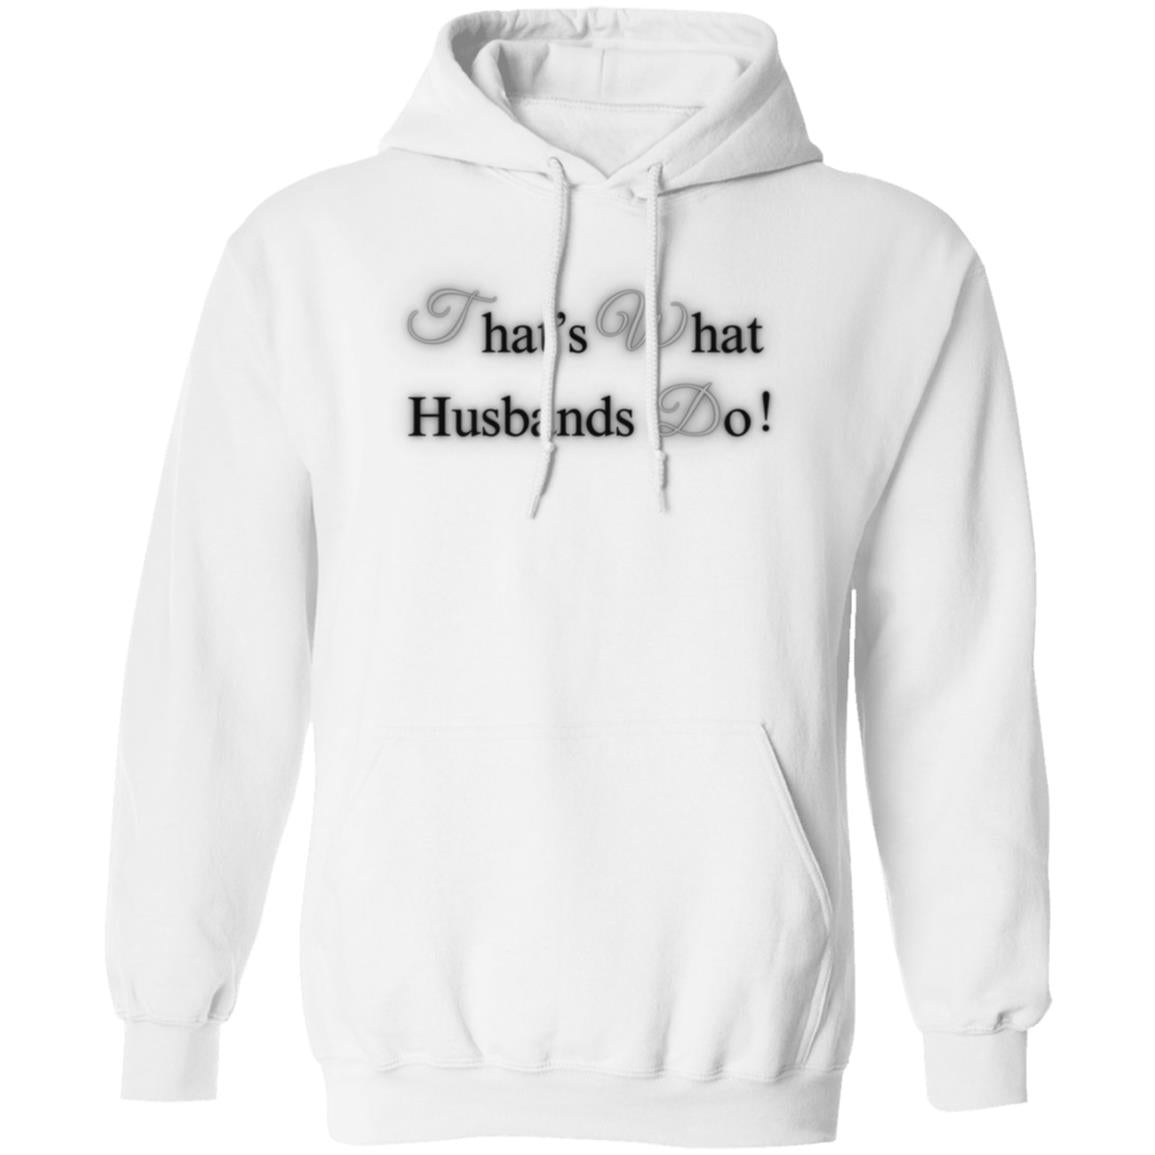 Thats what Husbands Do That's What Husbands Do|  Pullover Hoodie